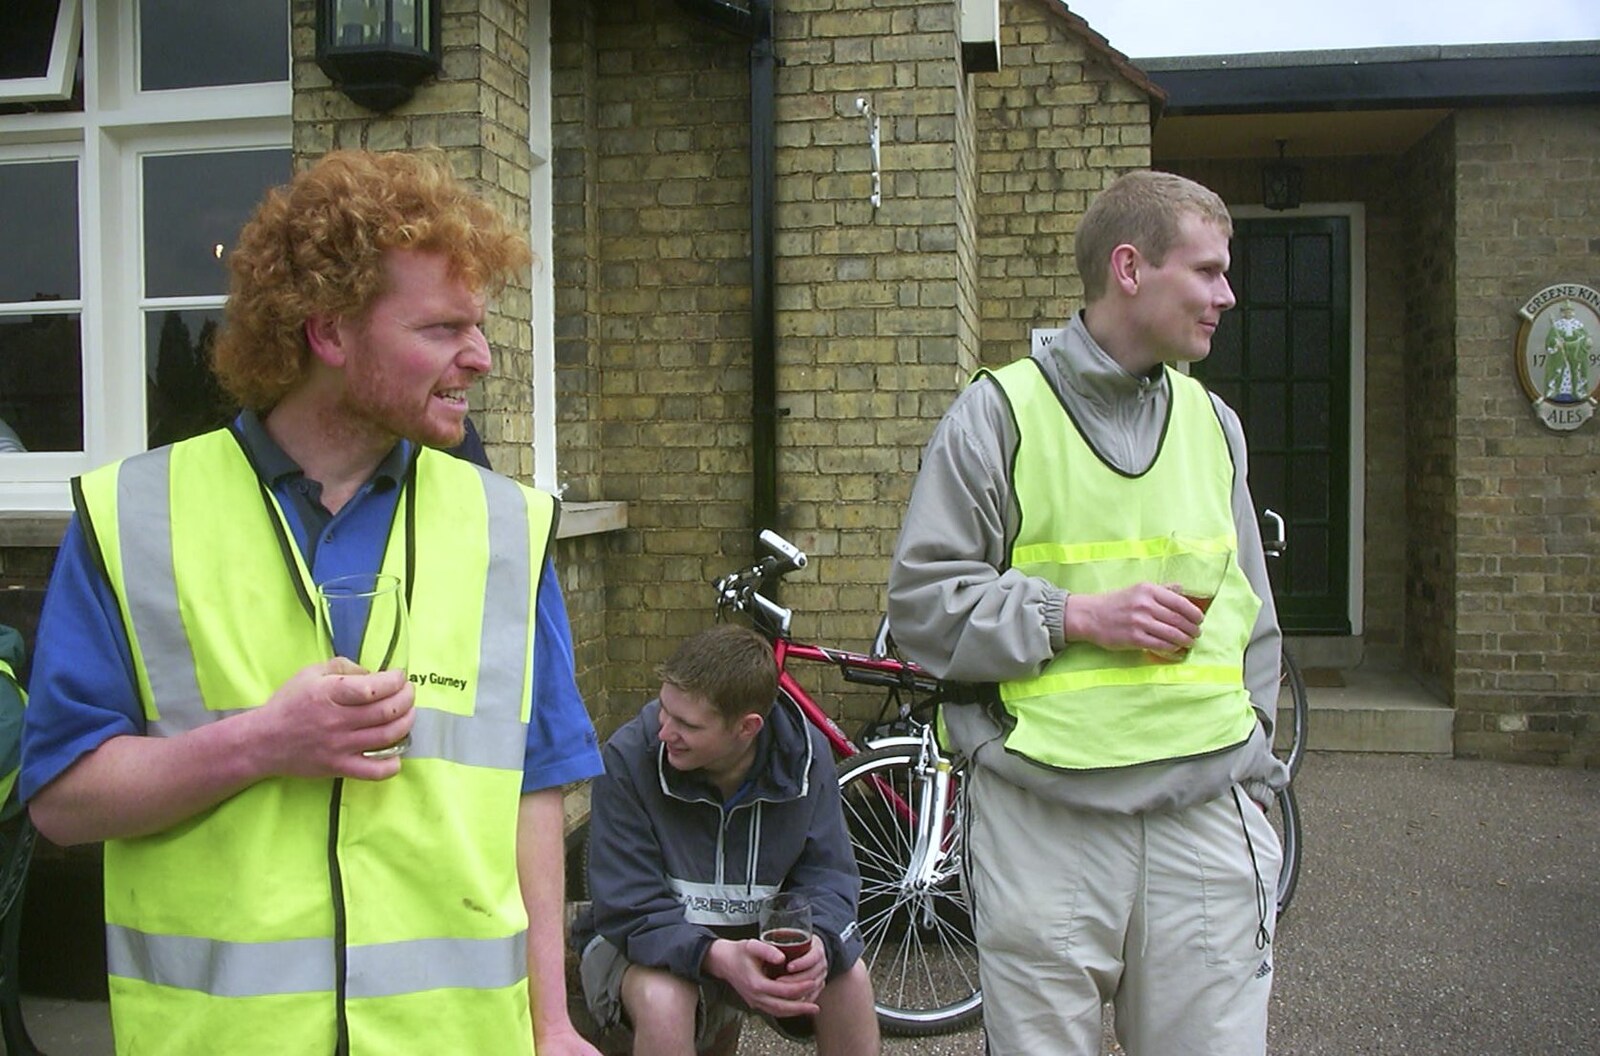 The BSCC Bike Ride, Shefford, Bedford - 11th May 2002: Wavy and Bill